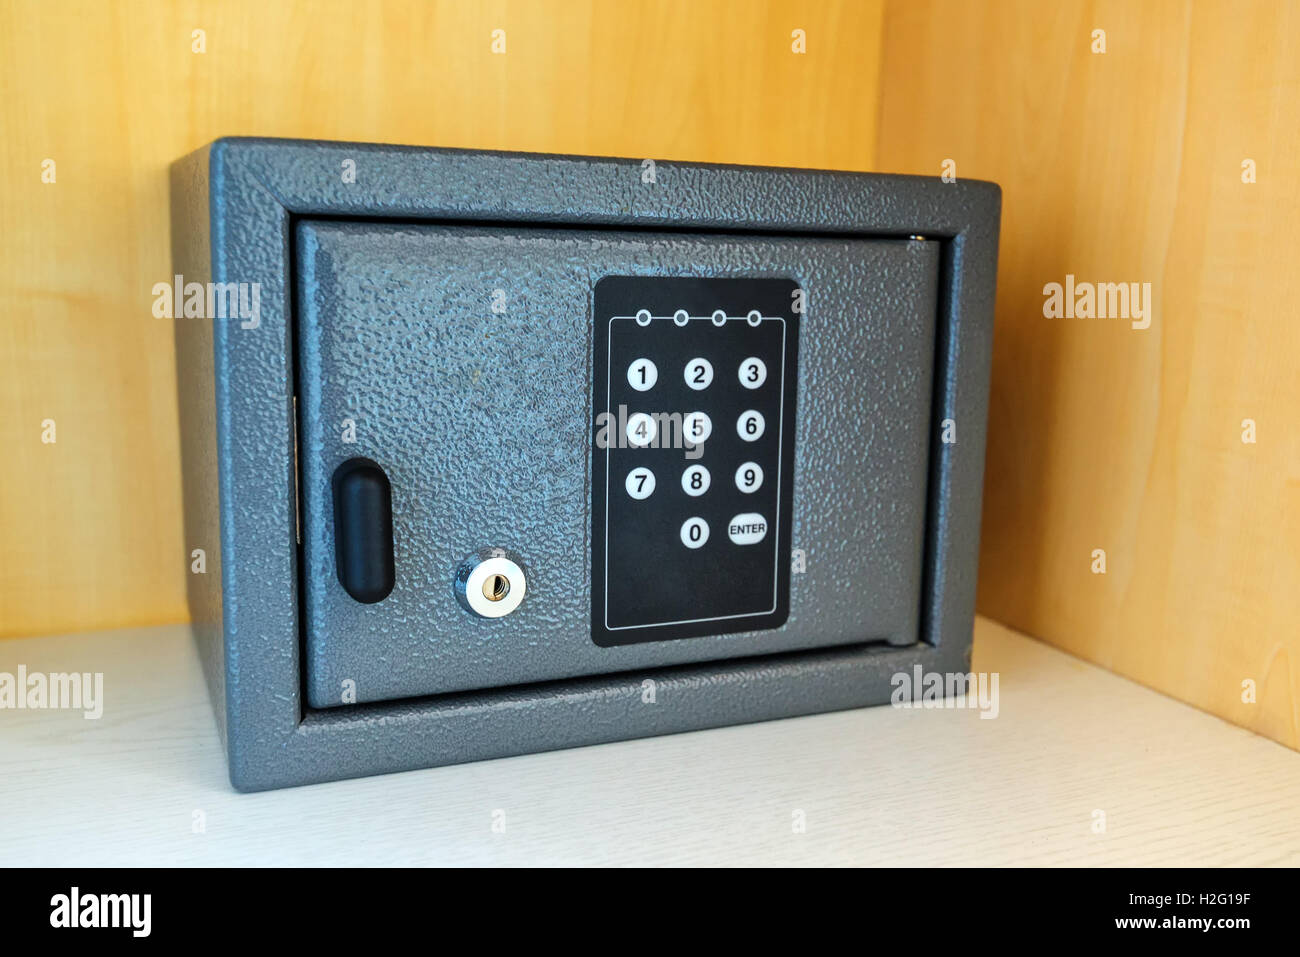 Hotel room safety deposit box with electronic PIN lock code Stock Photo